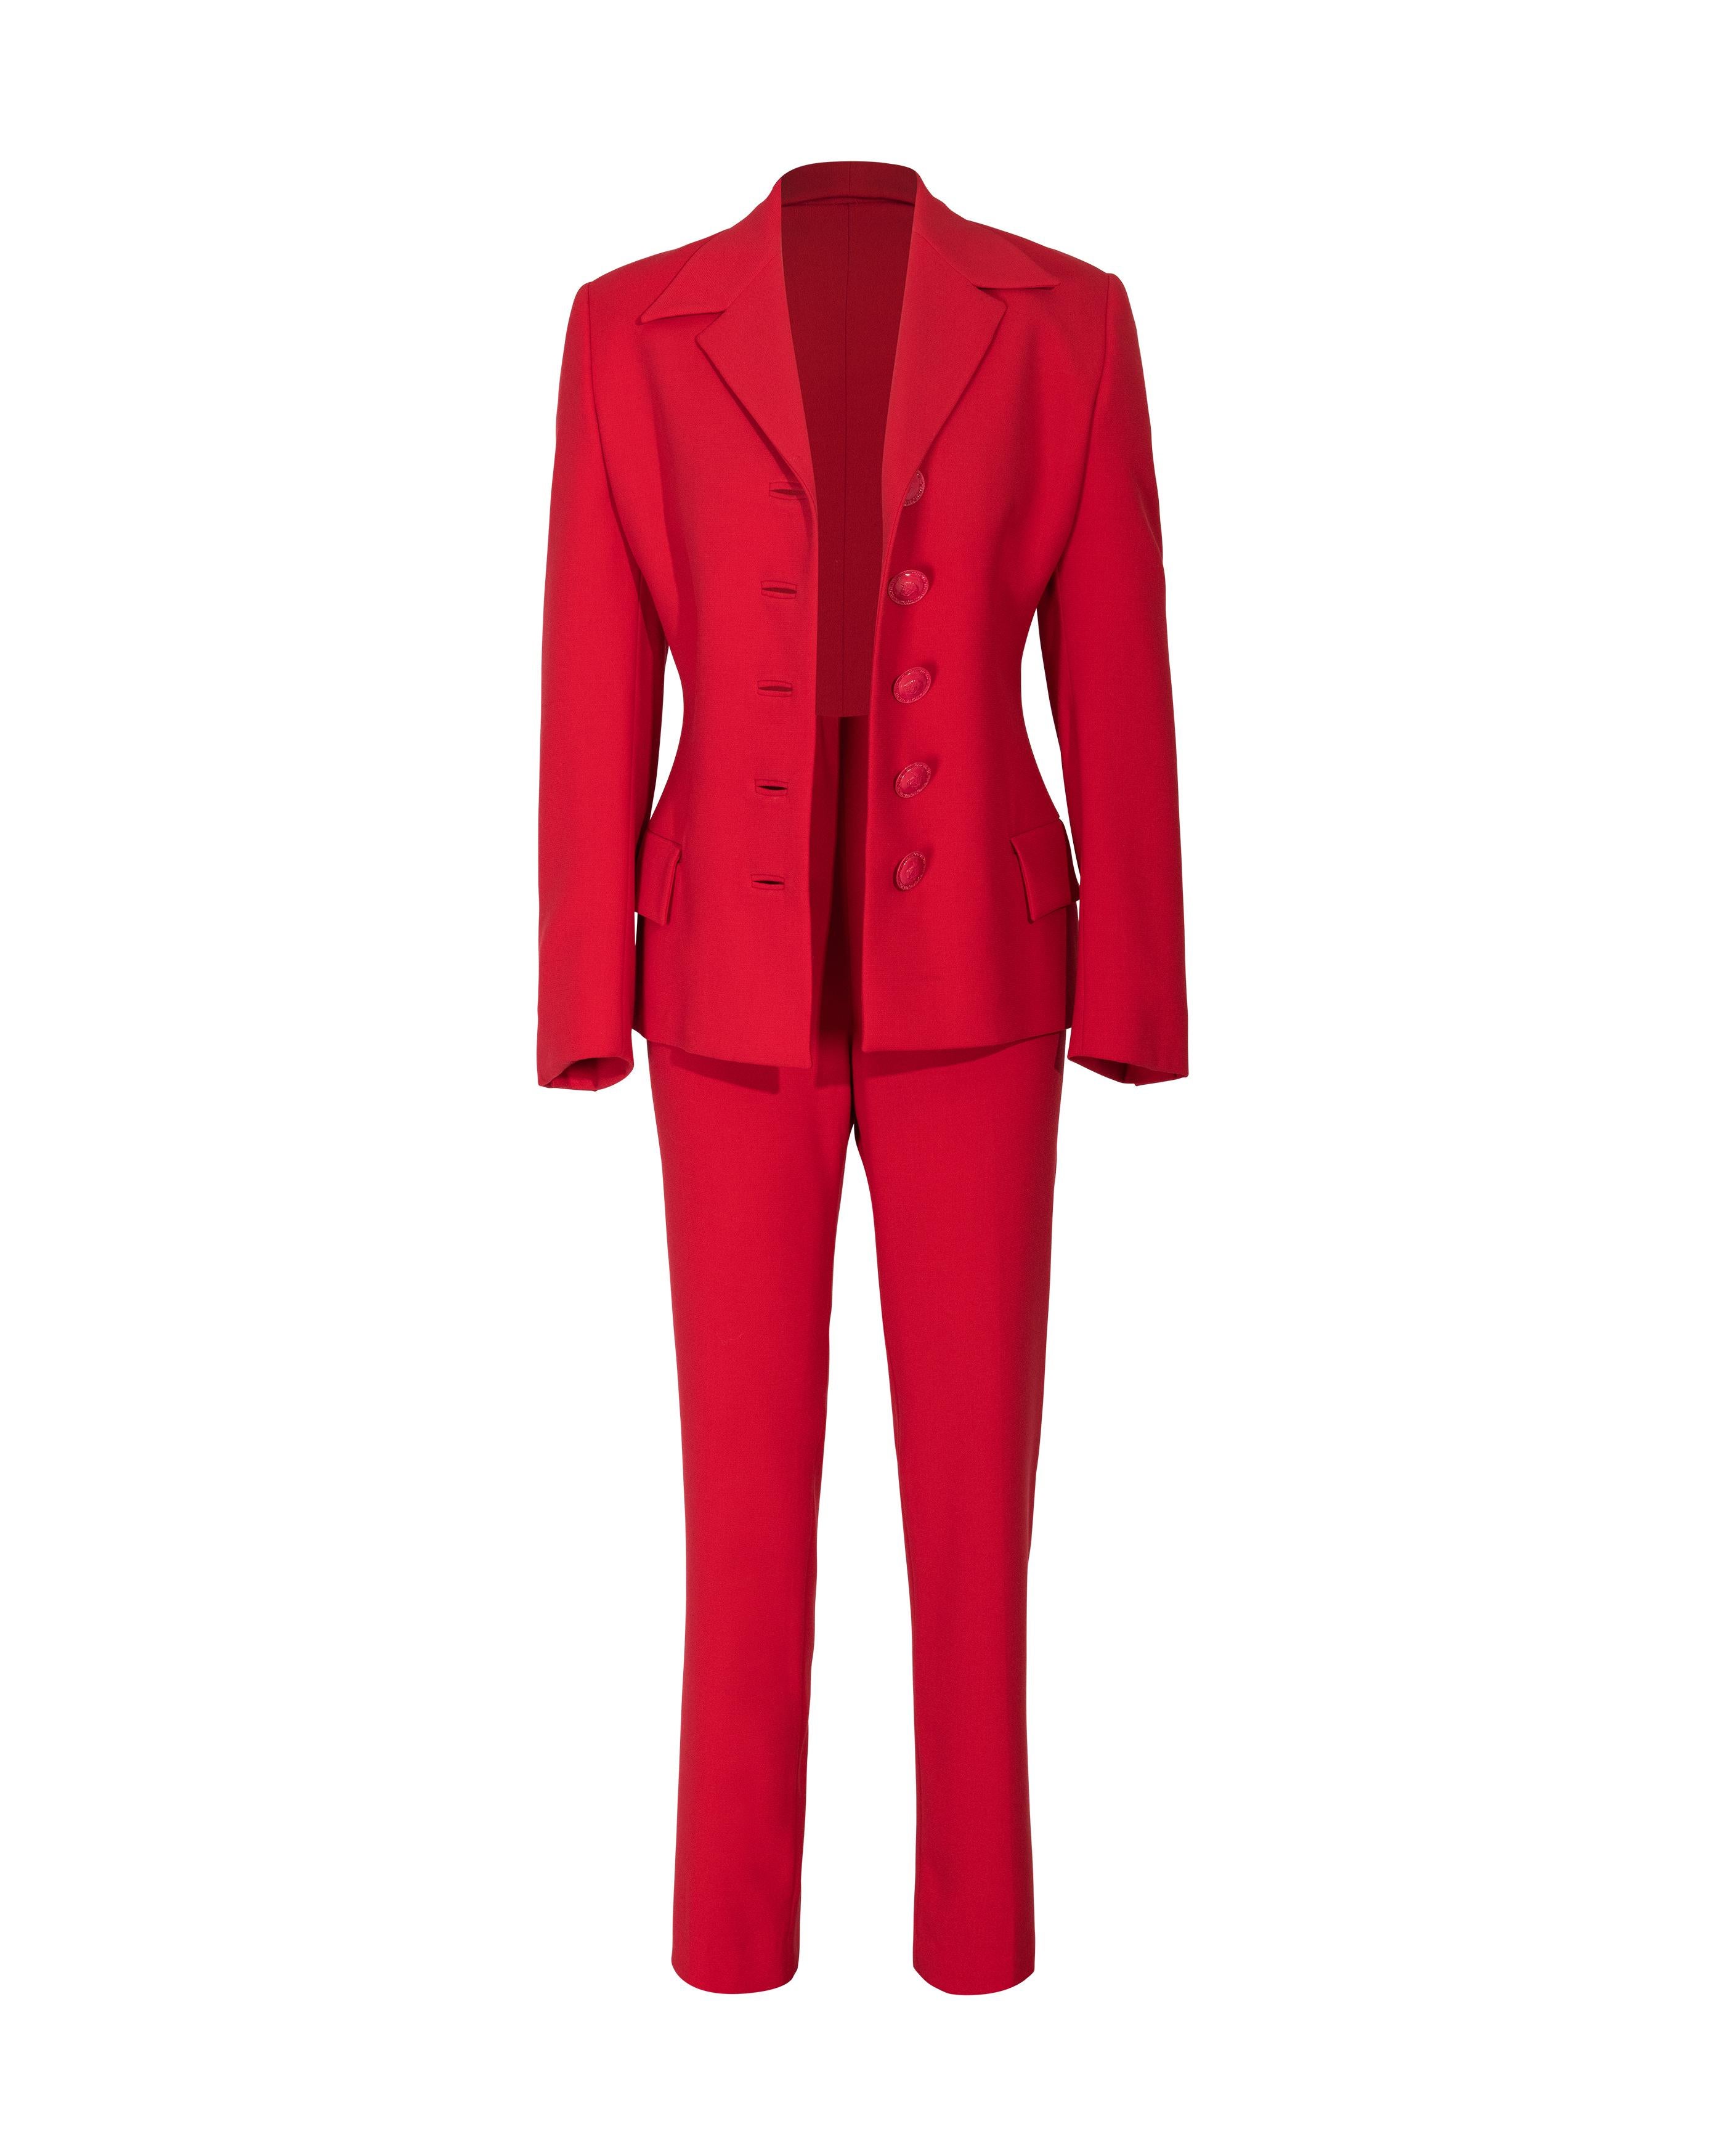 A/W 1995 Gianni Versace Red Suit Set 10